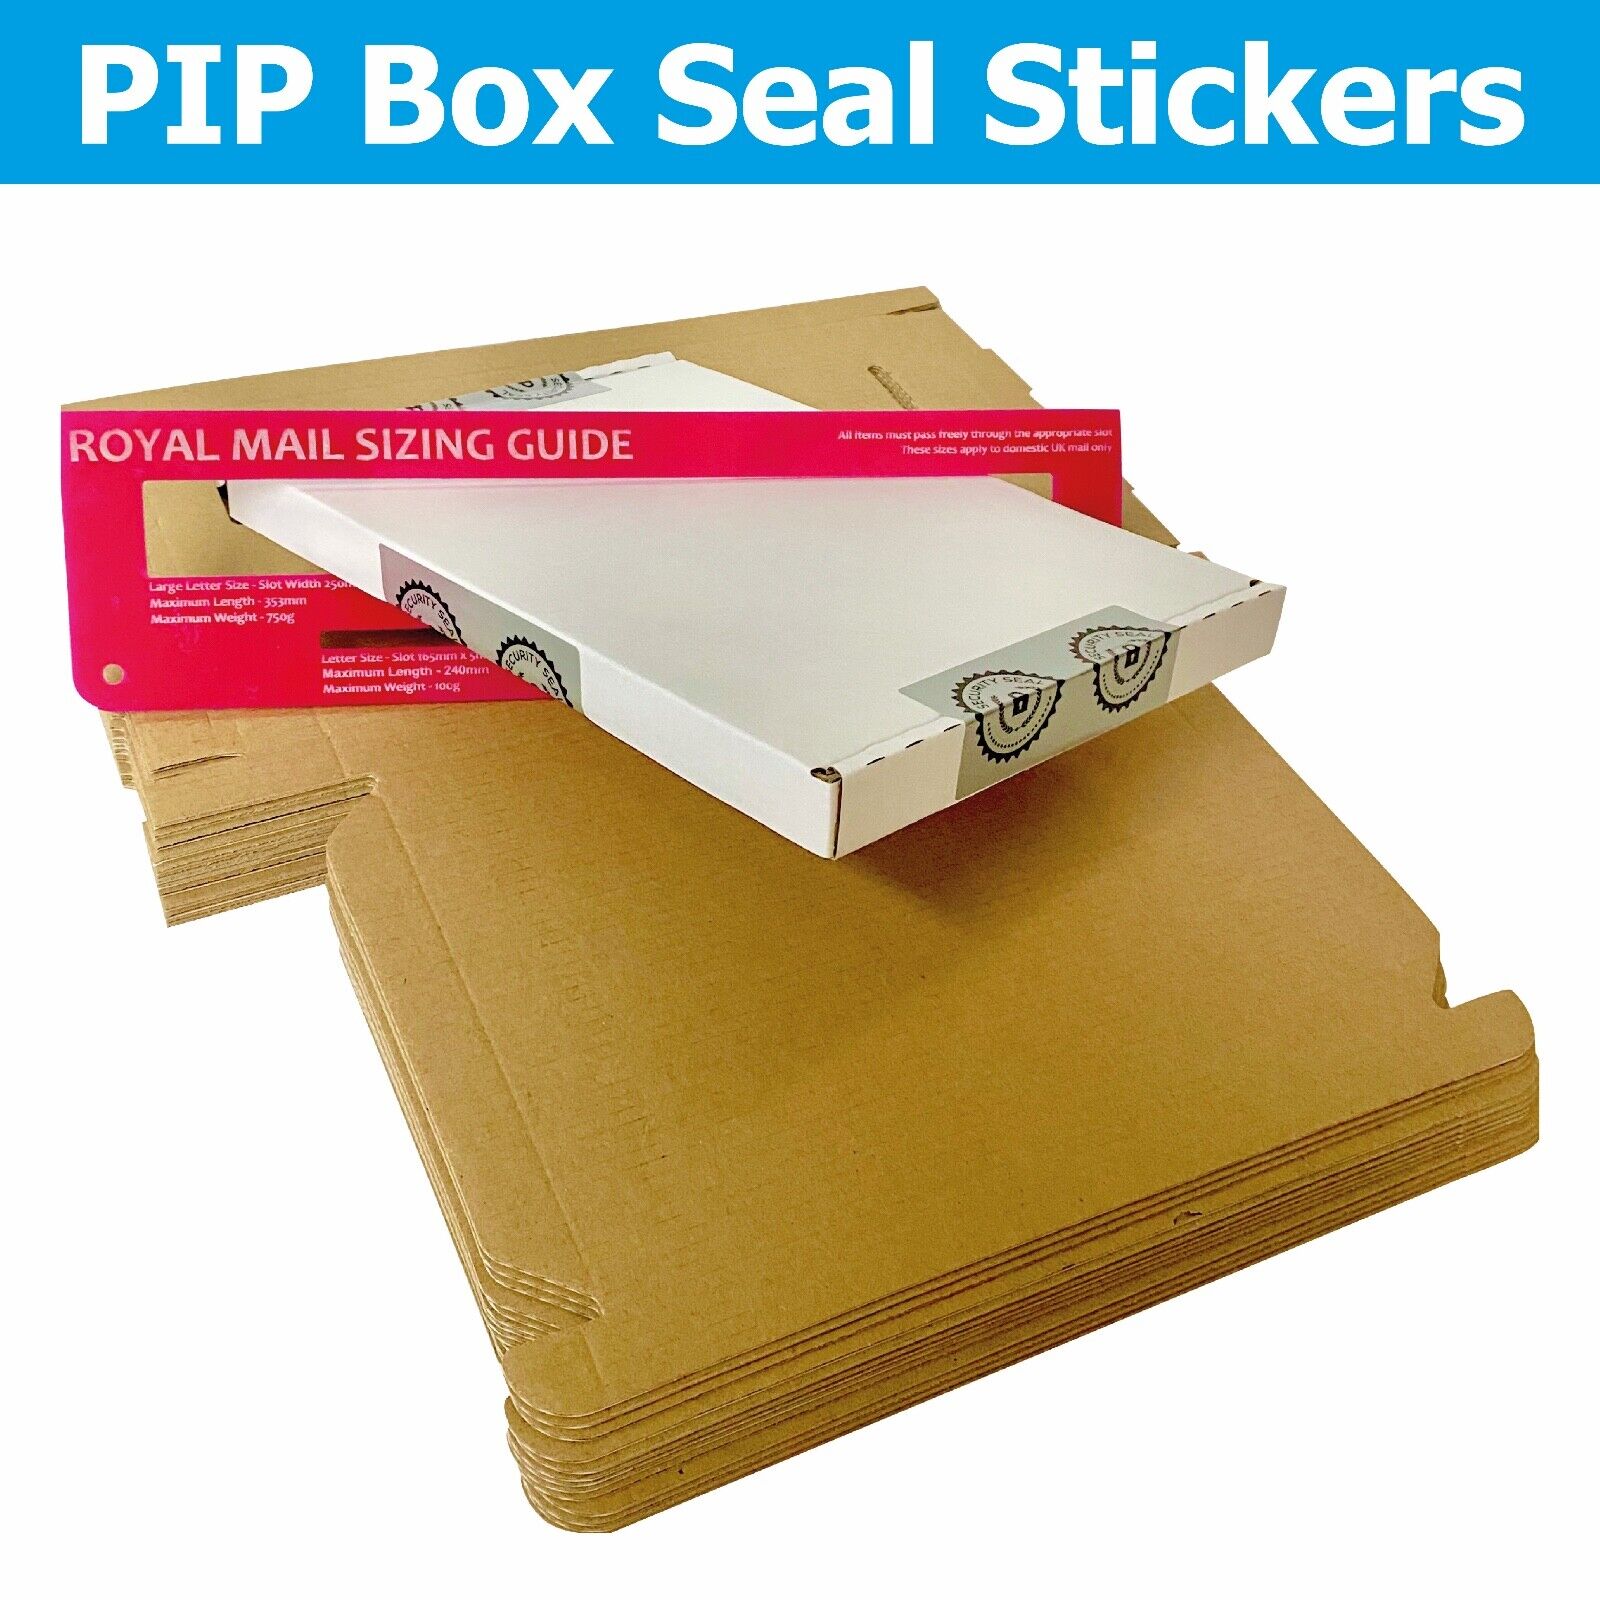 PIP Box / Package / BOX Security Seals - Ideal For all kinds of packaging GORĄCE, wybuchowe kupowanie